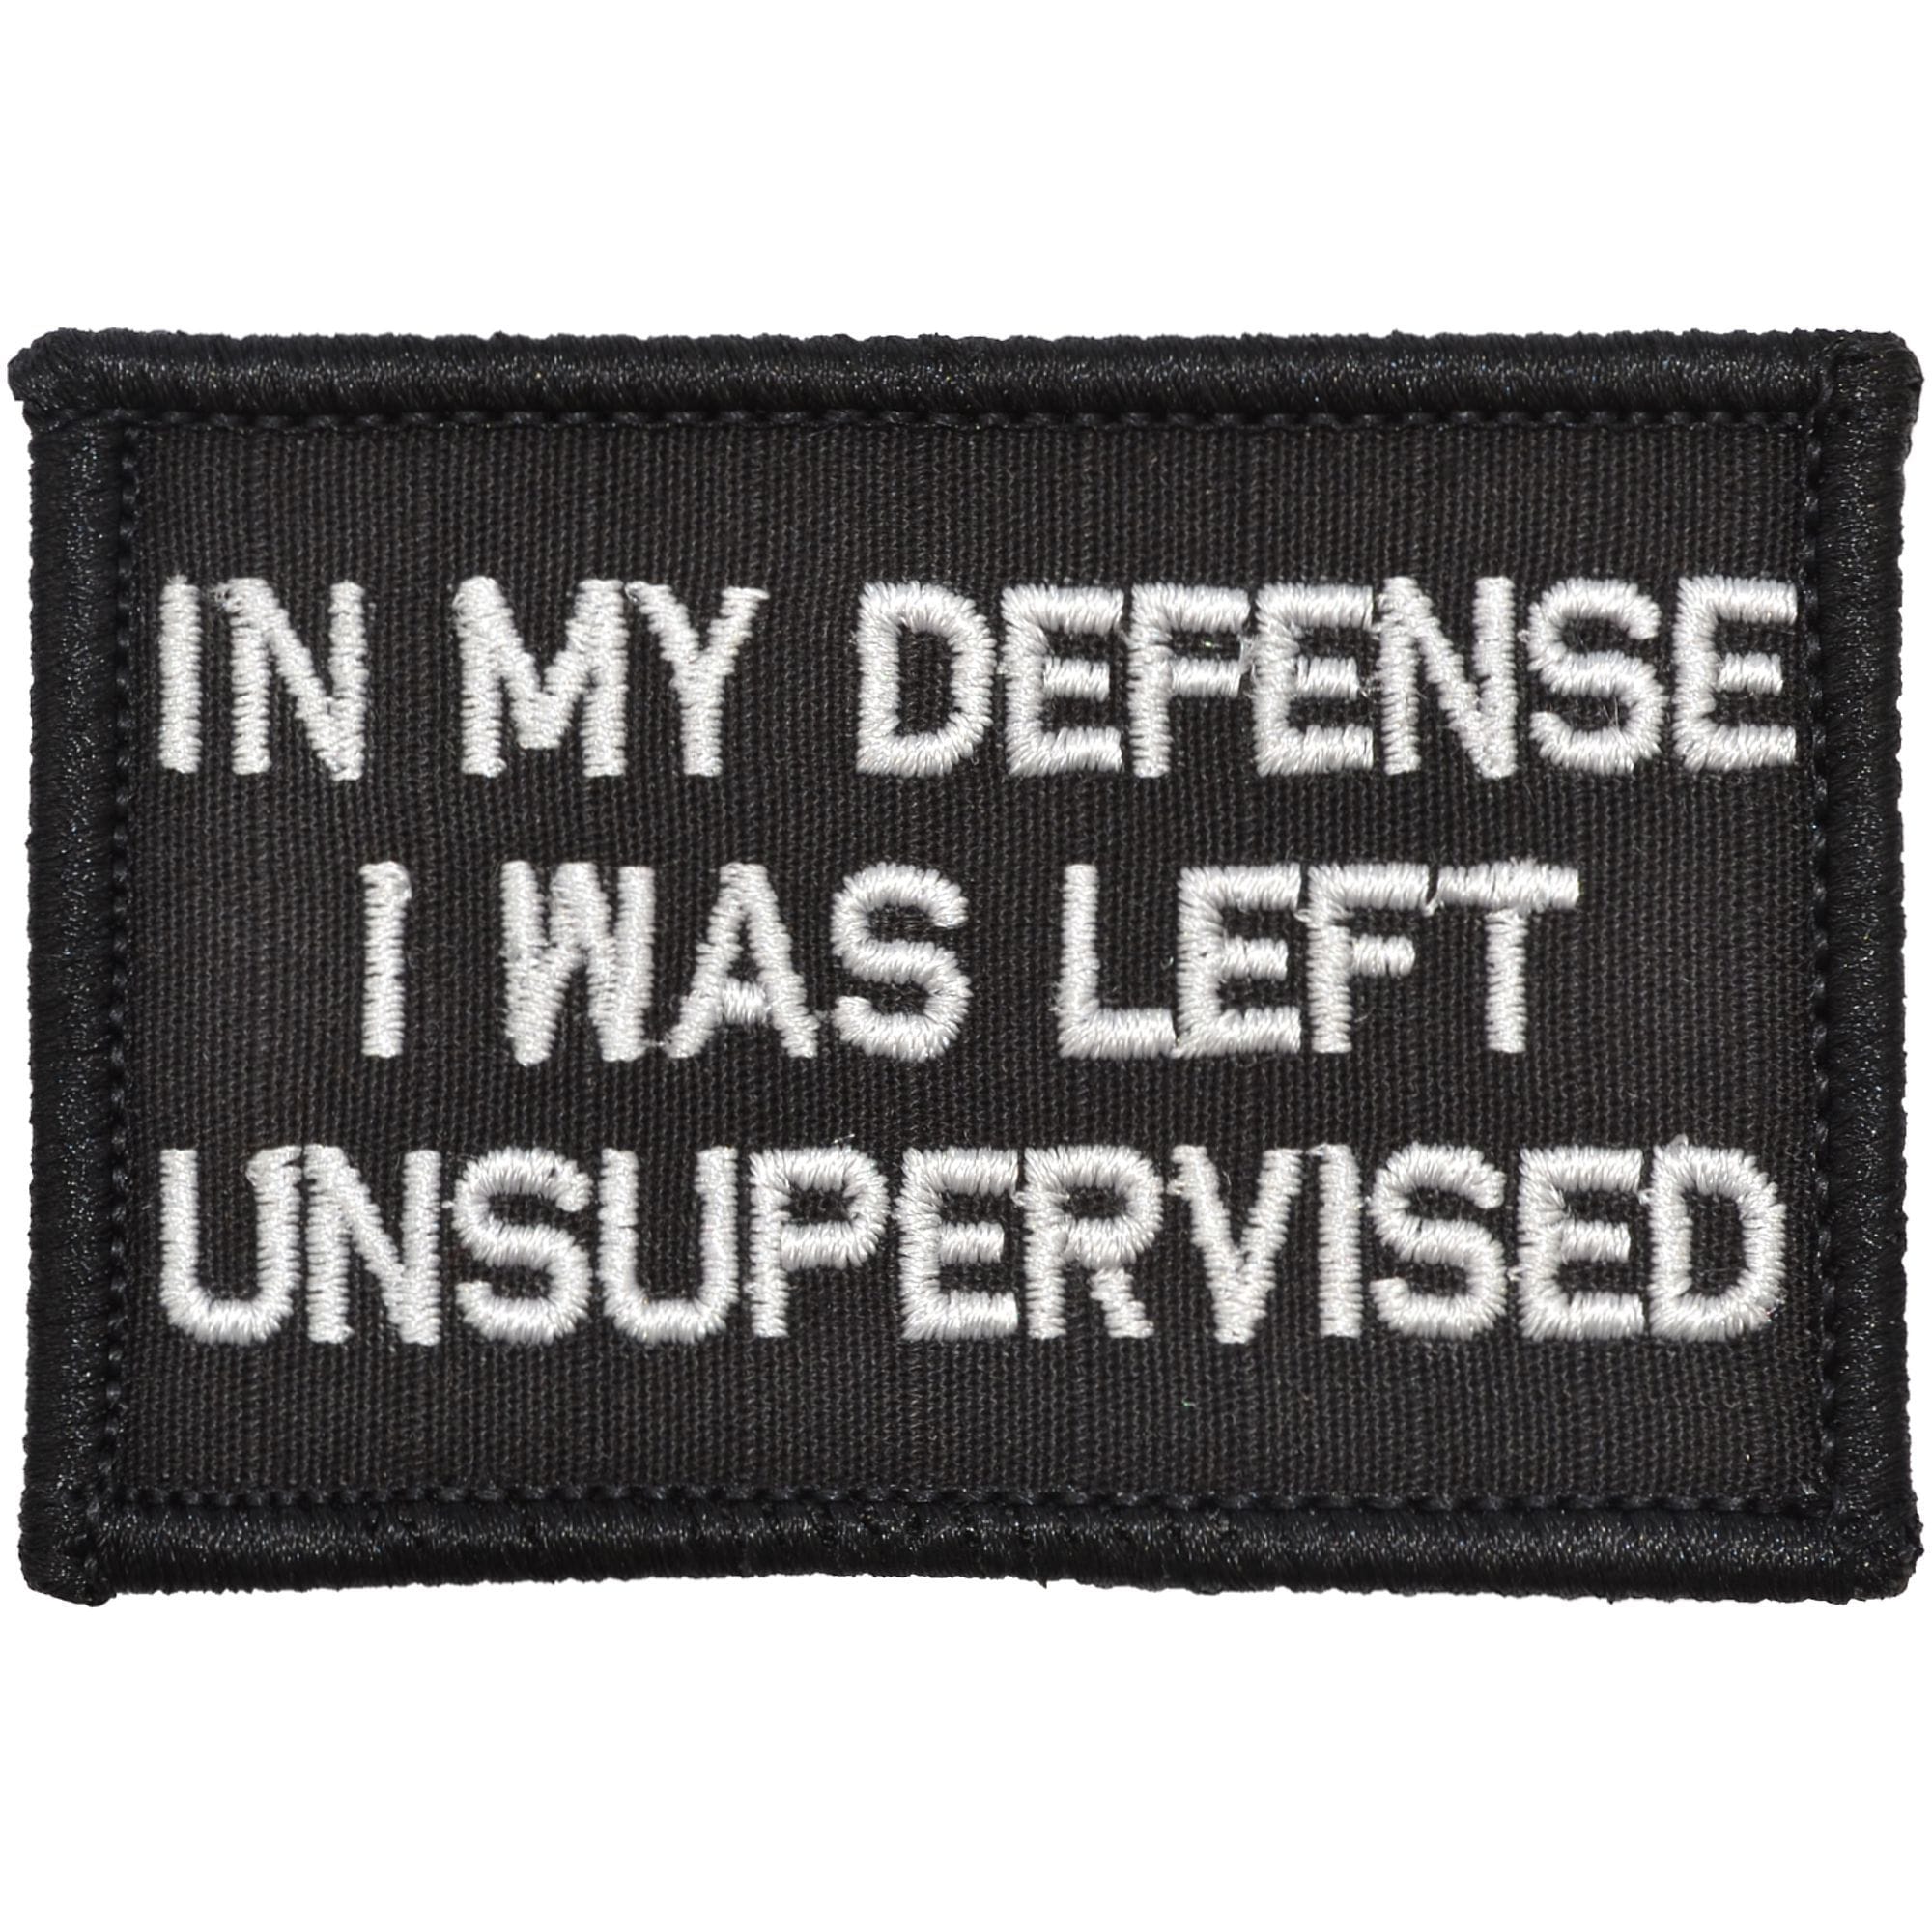 Tactical Gear Junkie Patches Black In My Defense I Was Left Unsupervised - 2x3 Patch